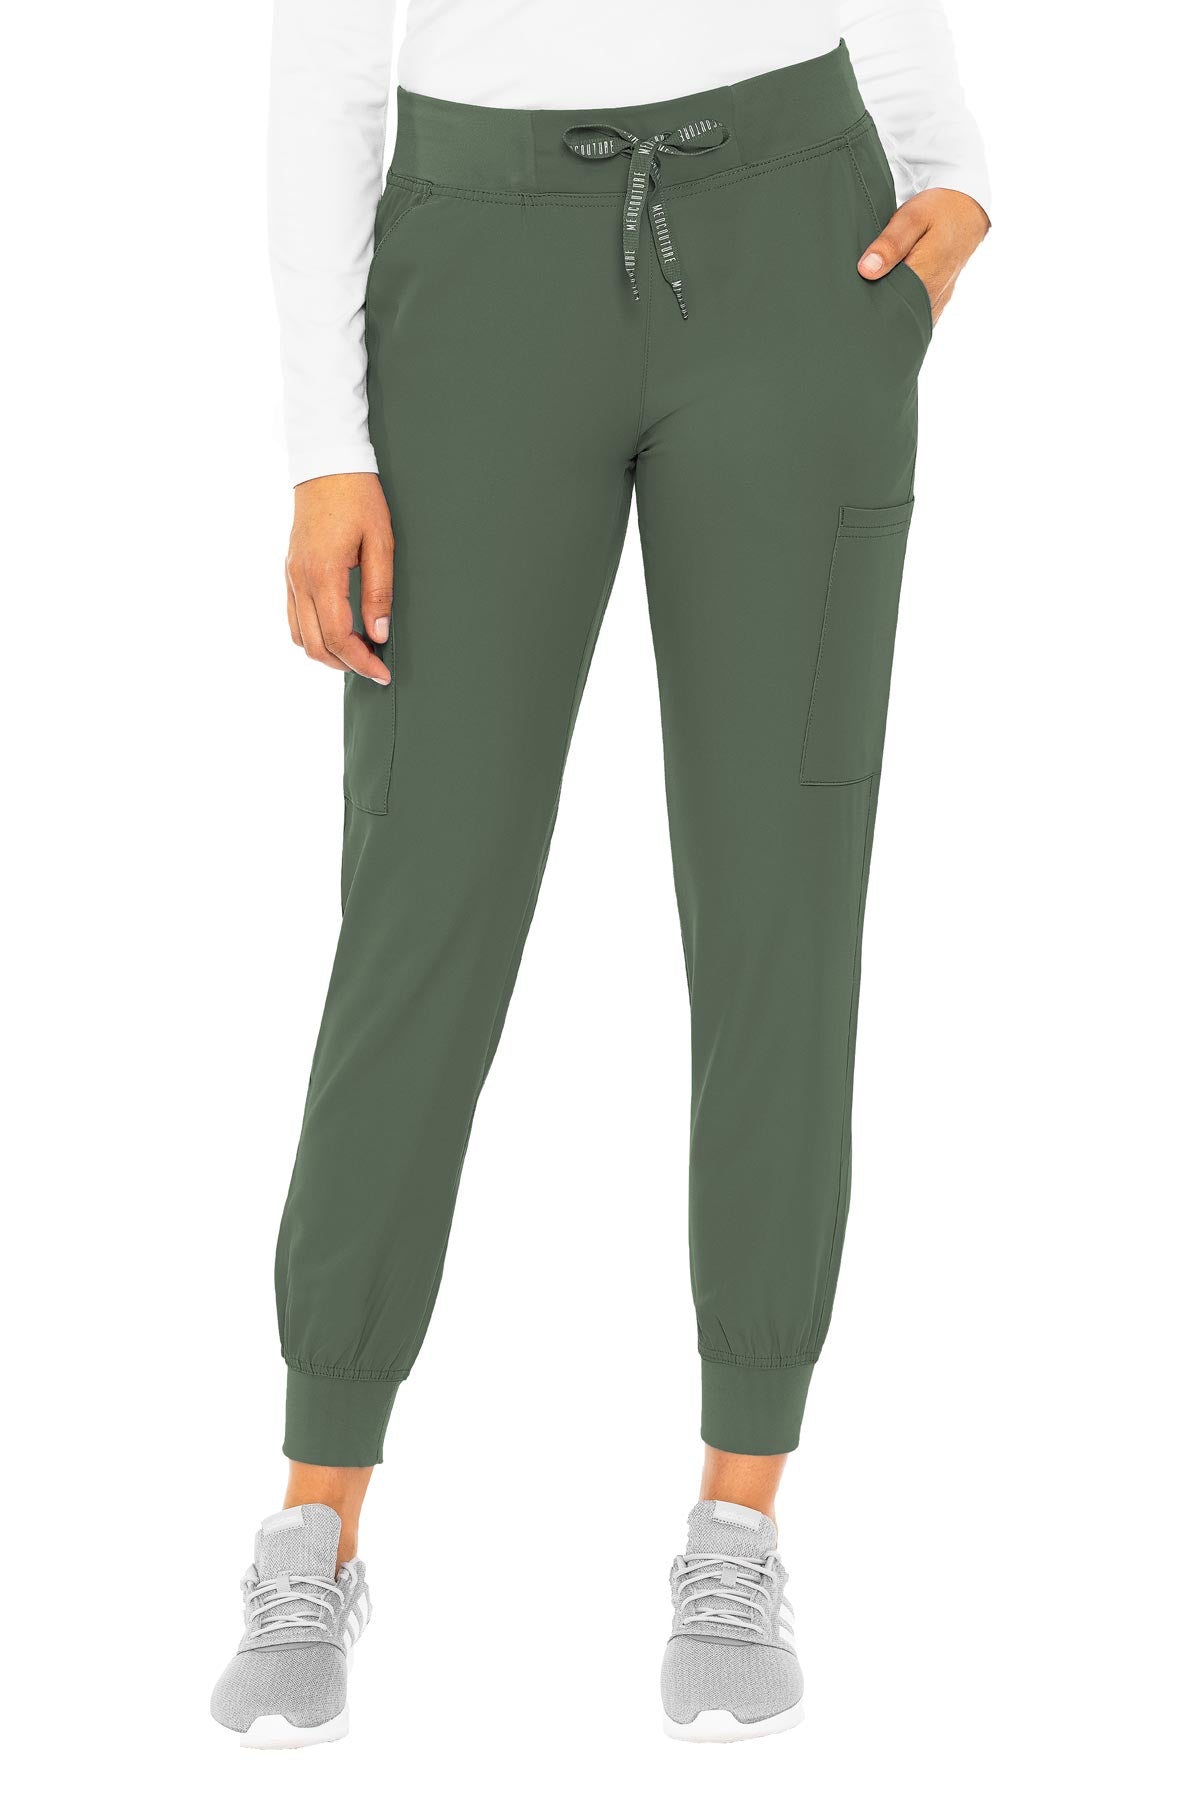 Med Couture 2711 Insight Jogger Pant Olive Green